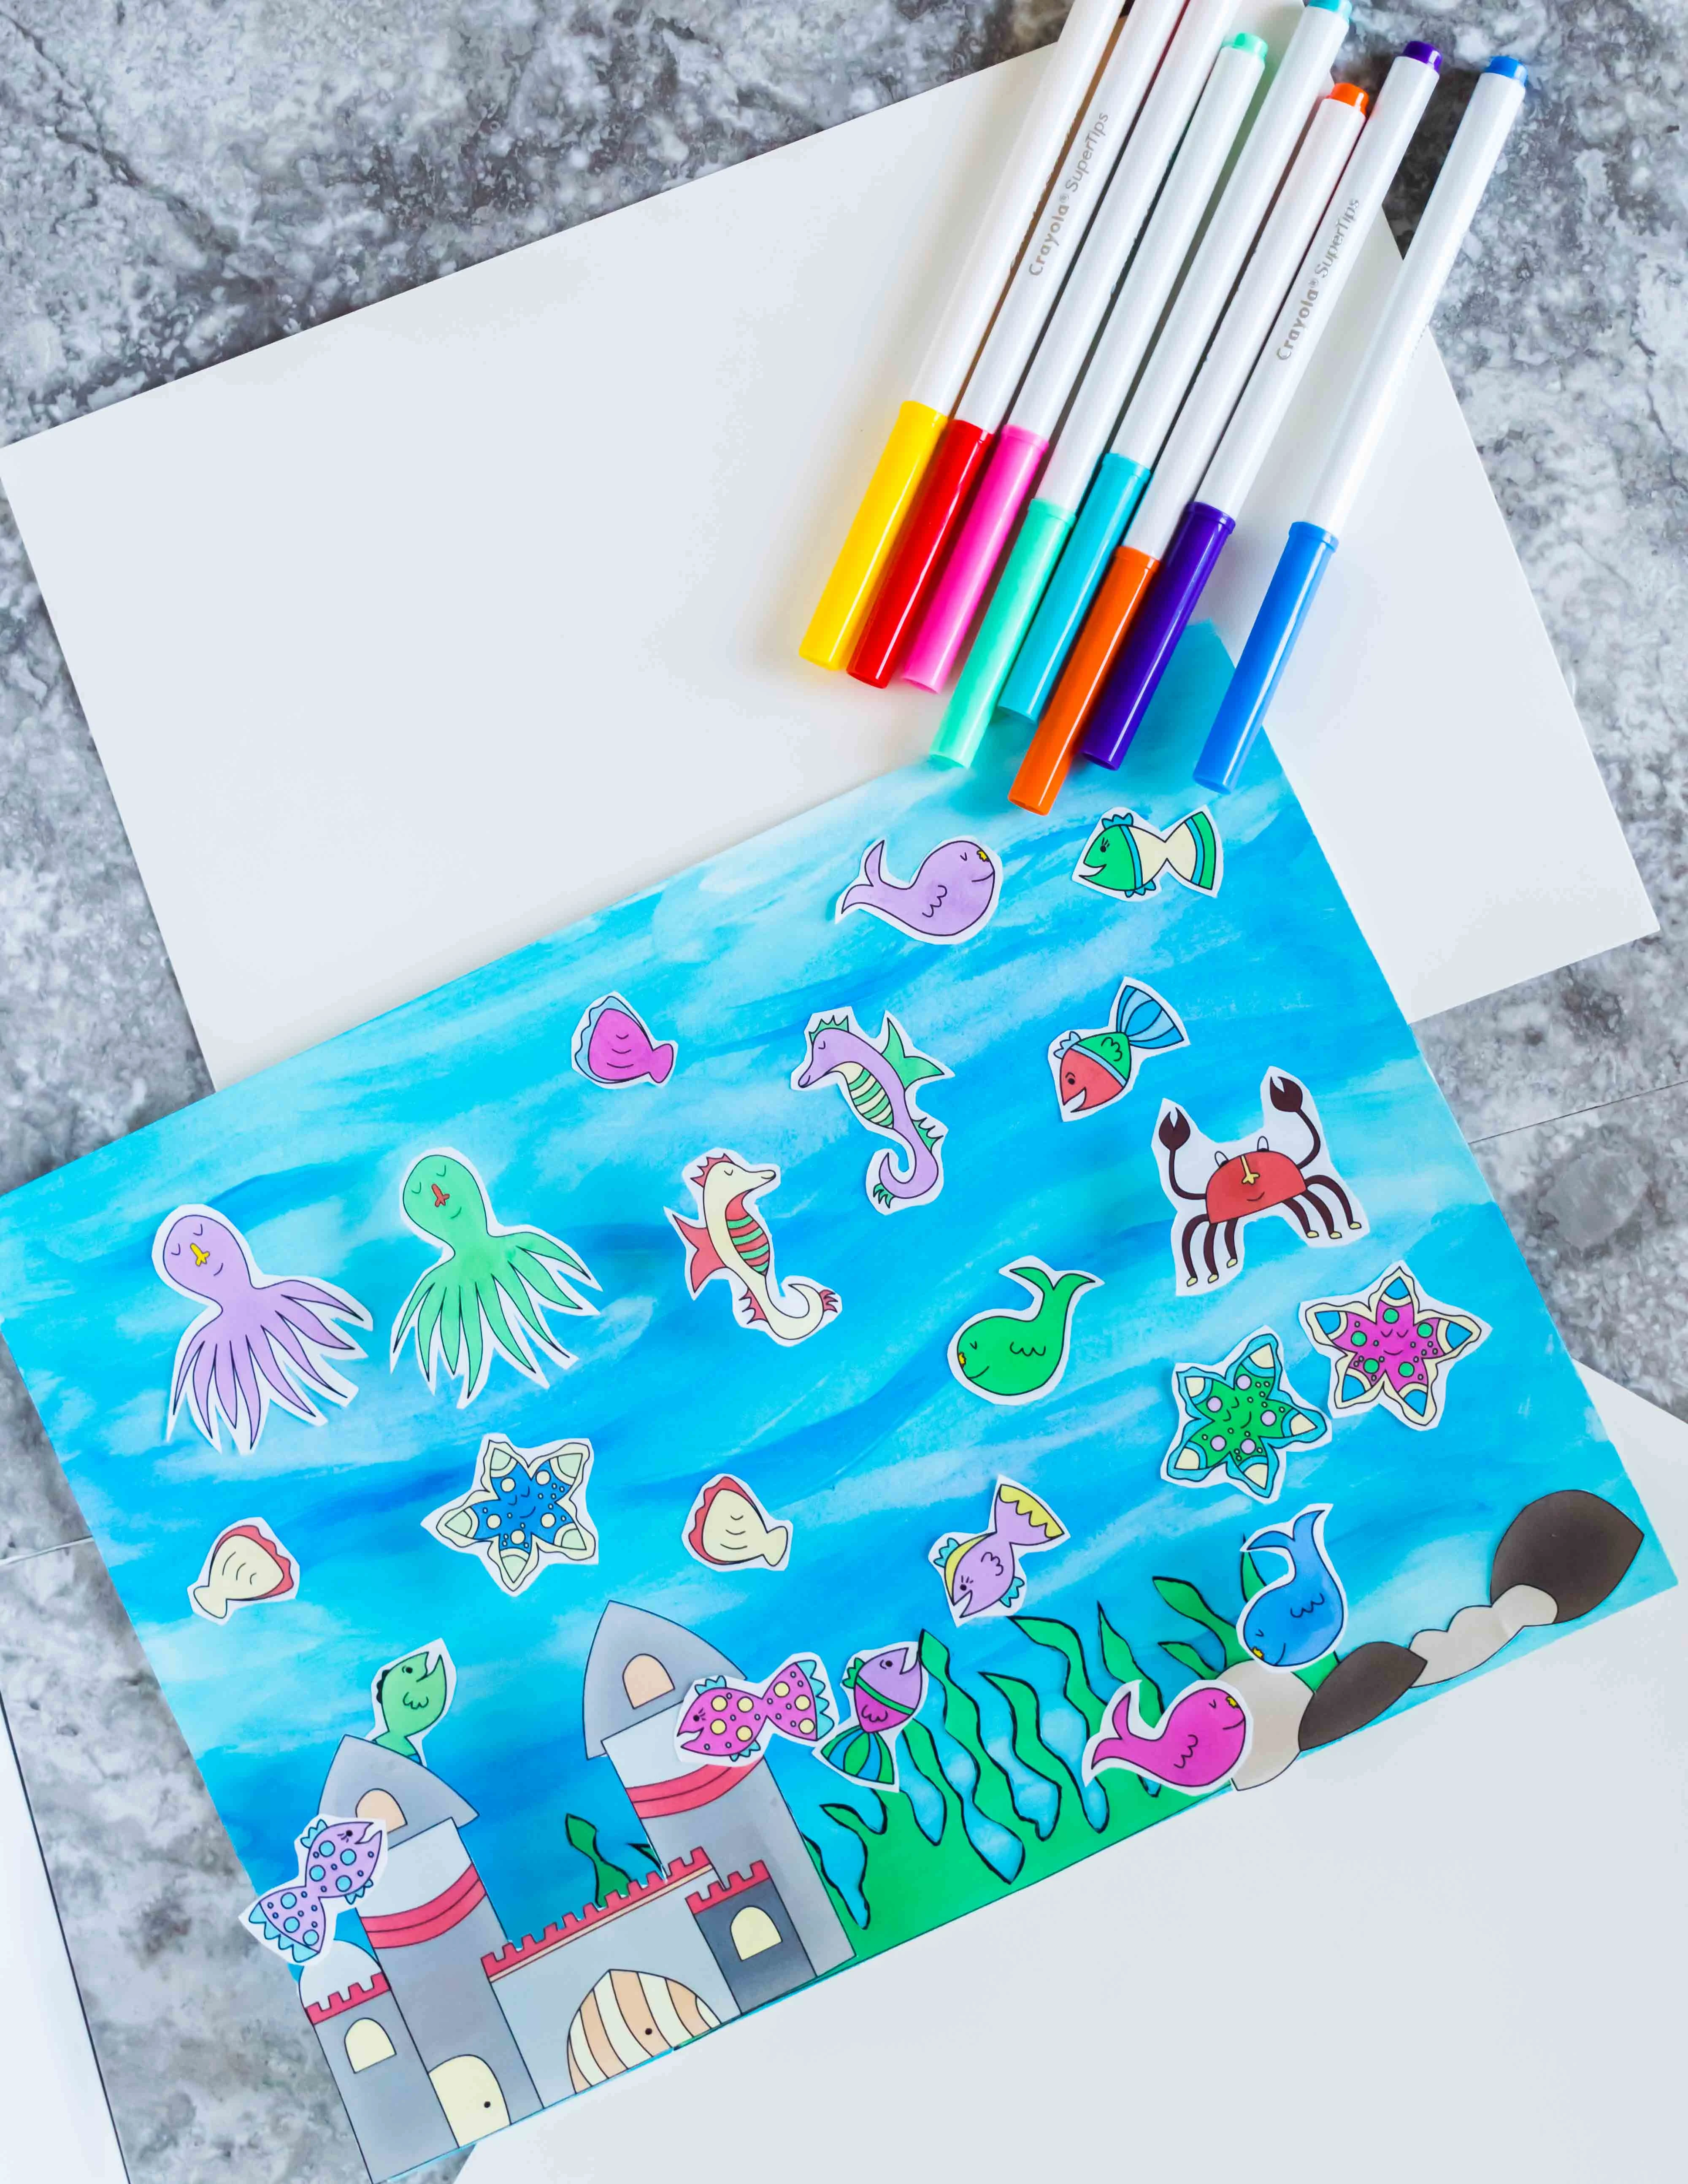 What a cool FISH TANK CRAFT! Your kids will have so much fun with this ACTIVITY. They'll be busy cutting, coloring and gluing. PLUS there is FREE PRINTABLE!